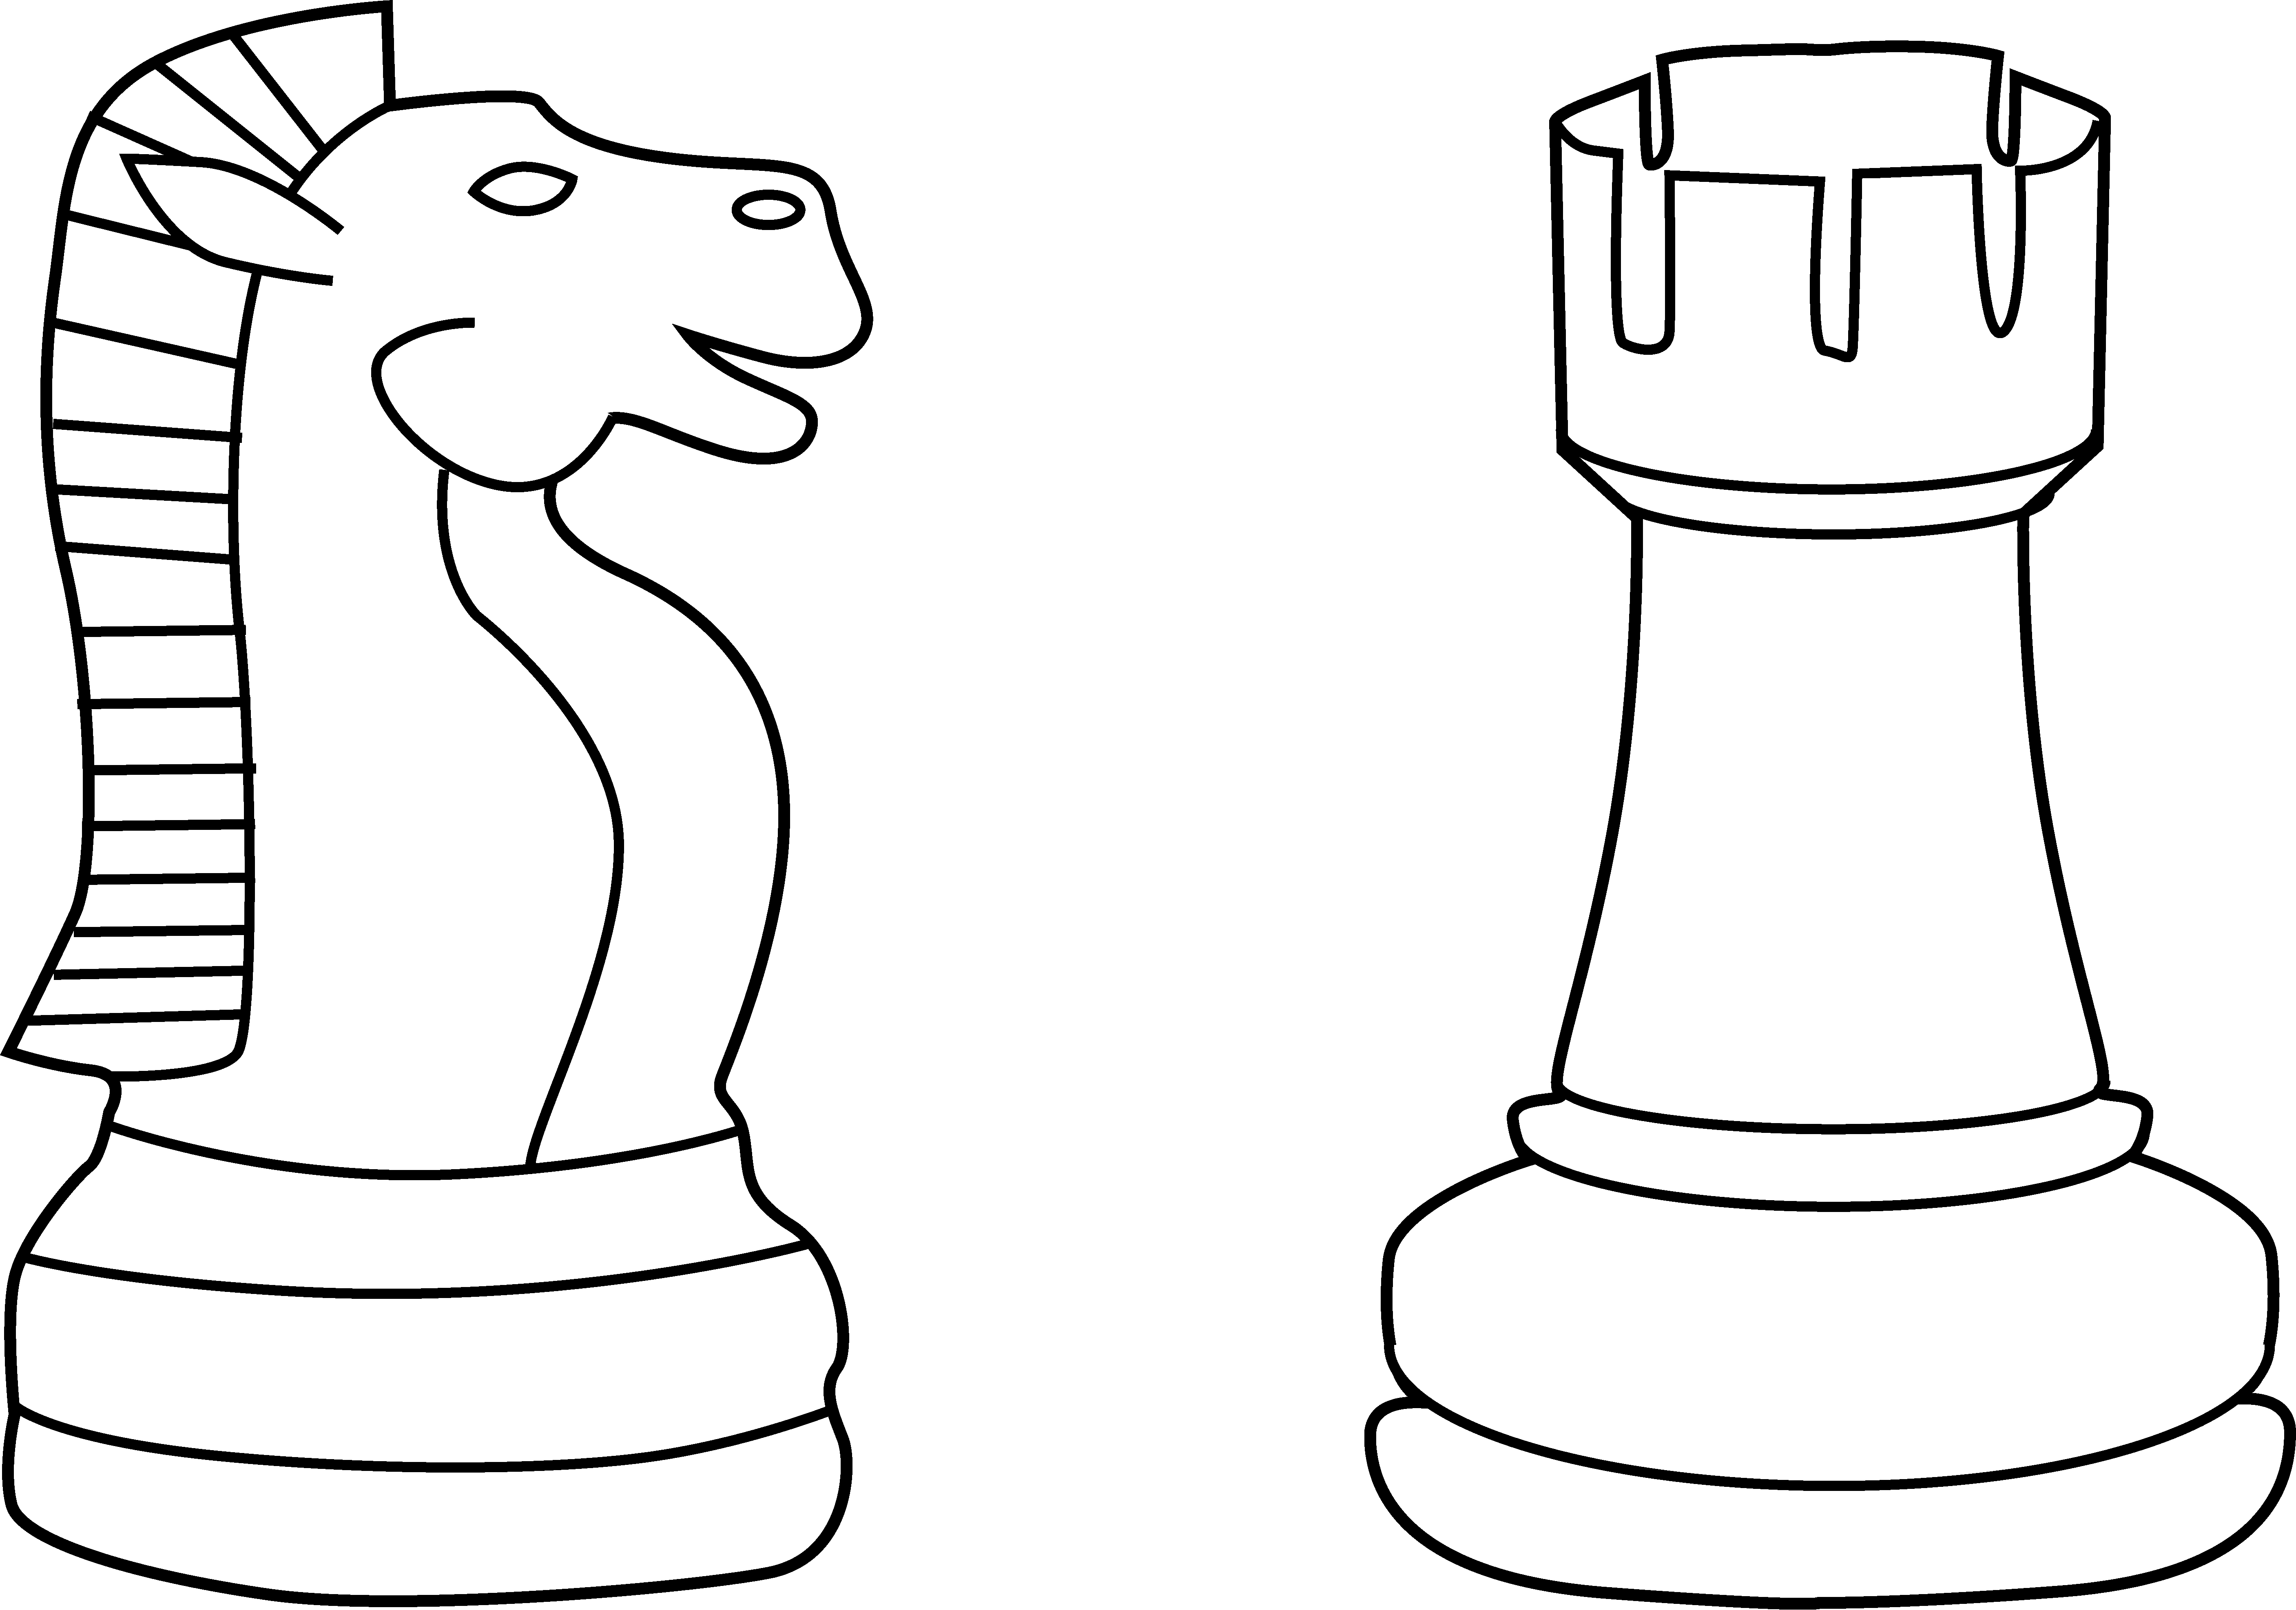 Two Chess Pieces Line Art - Free Clip Art